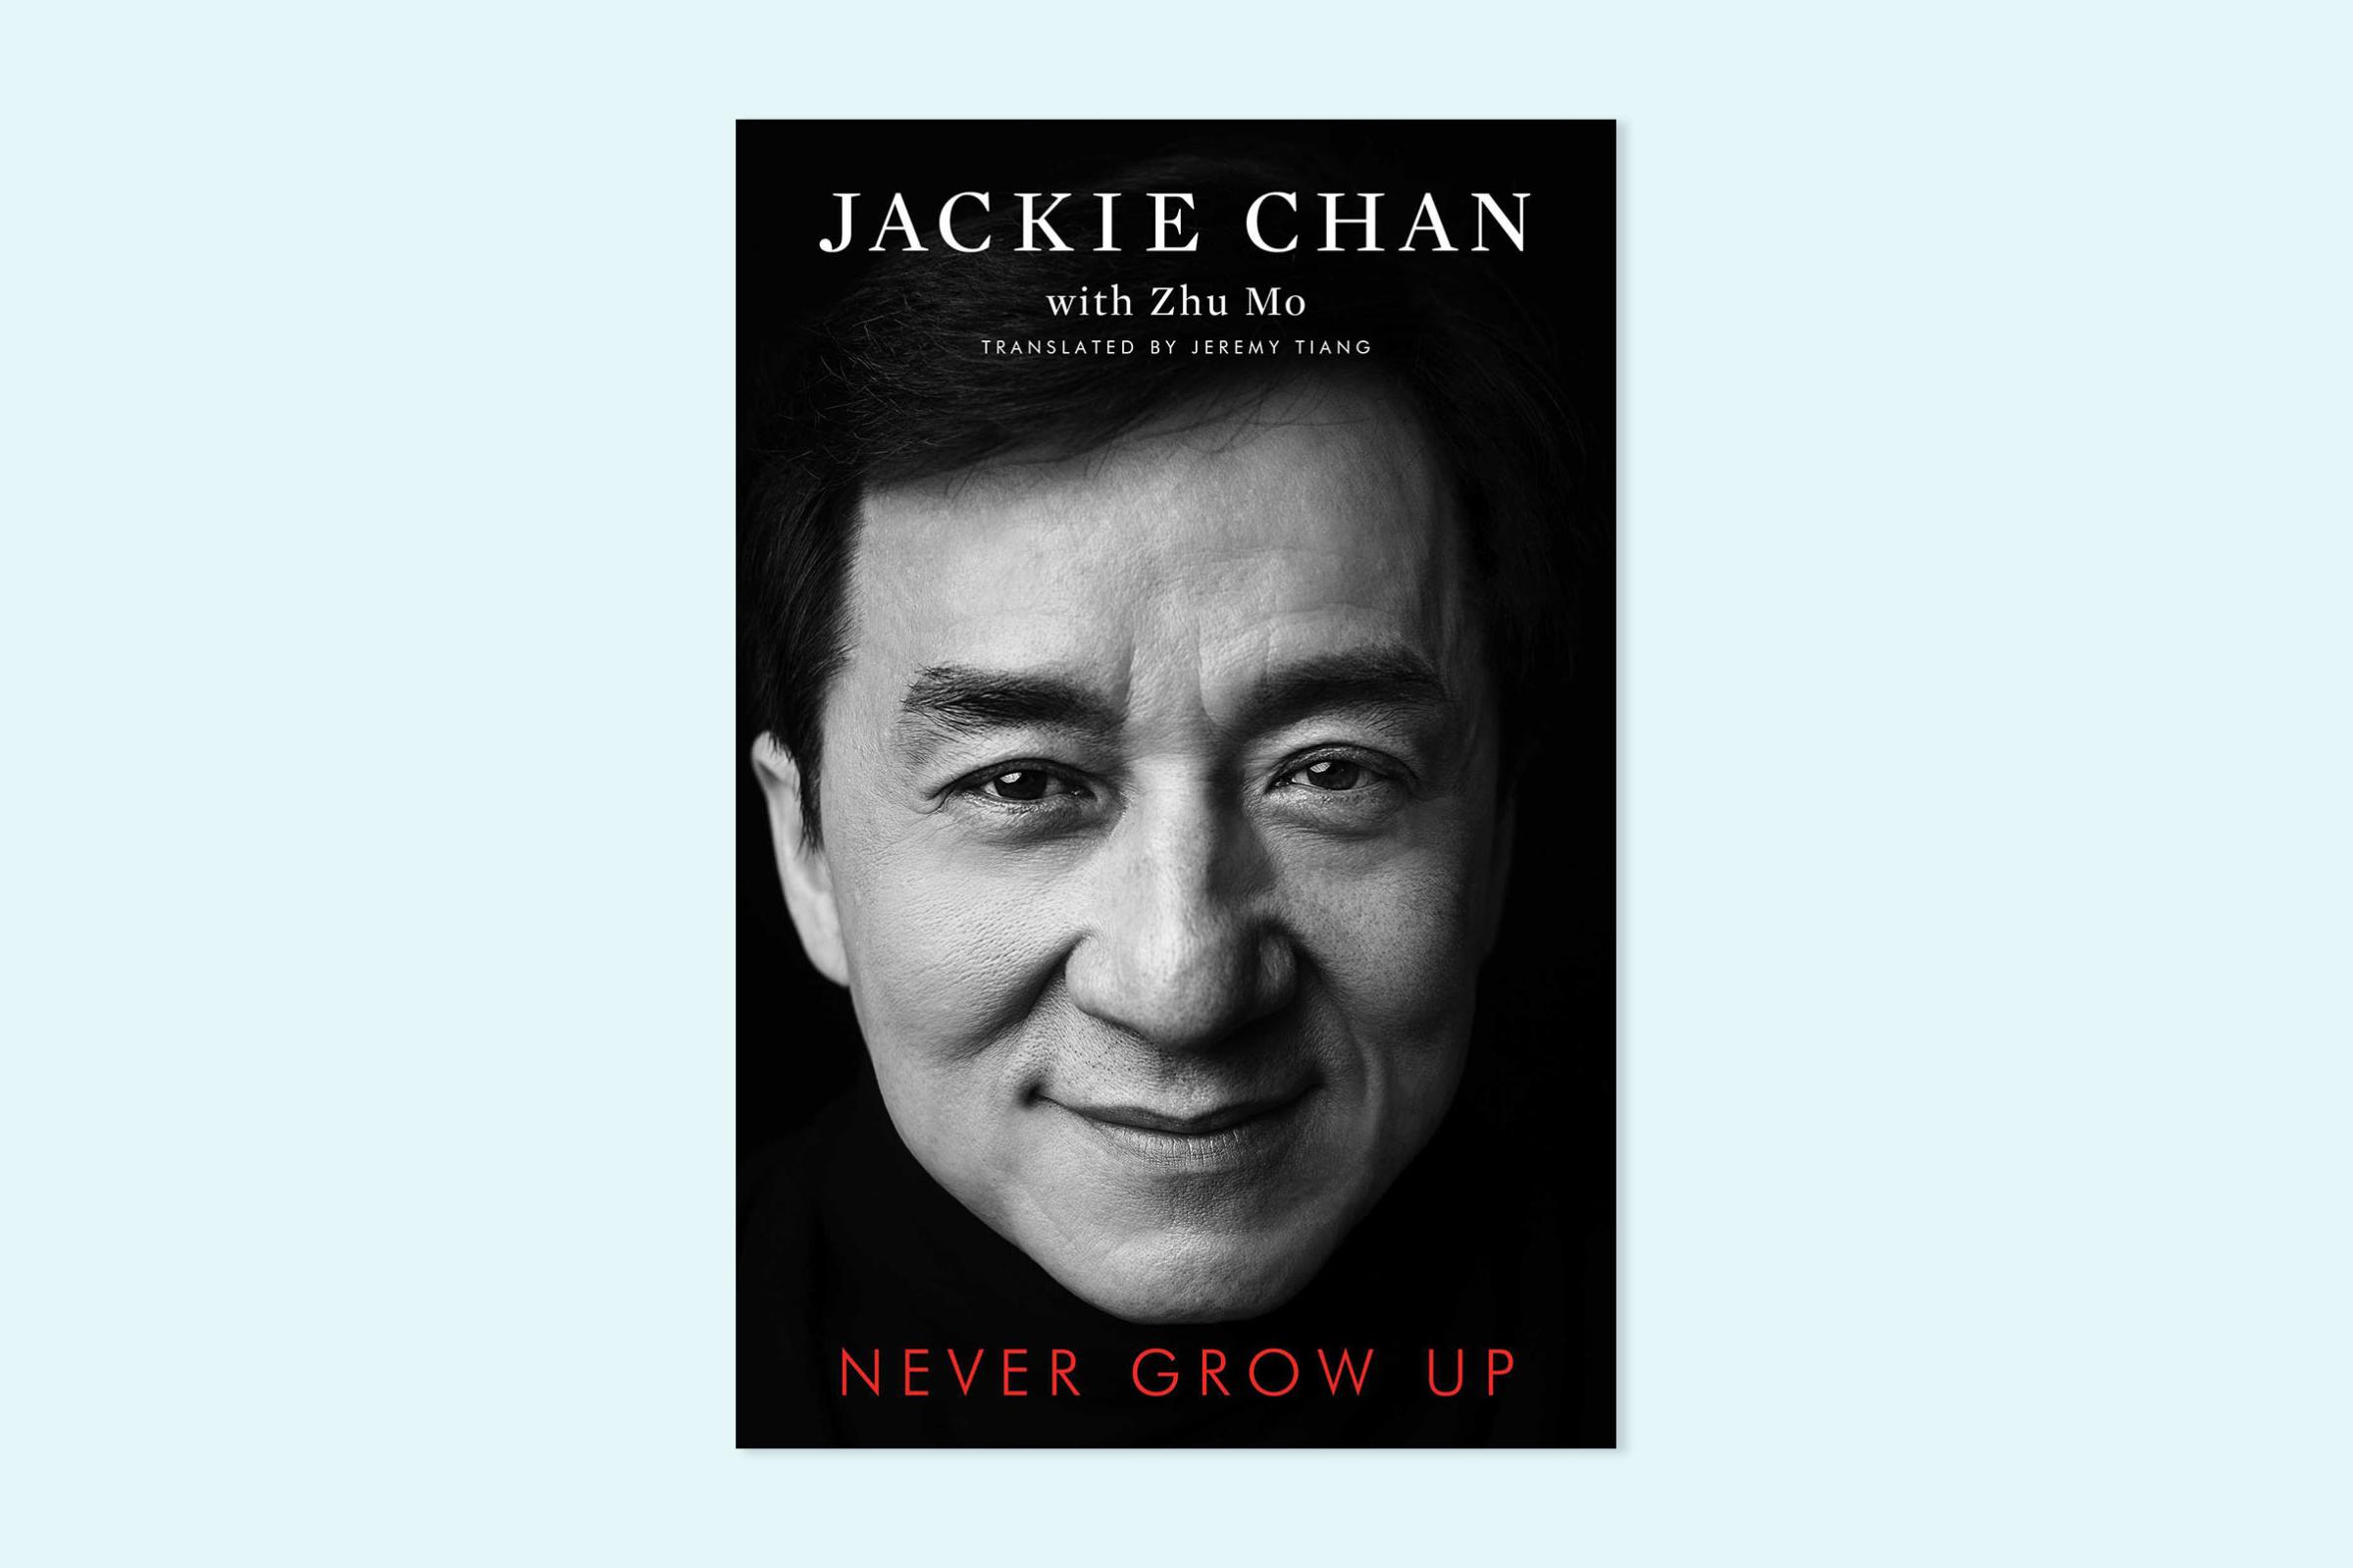 Never Grow Up by Jackie Chan